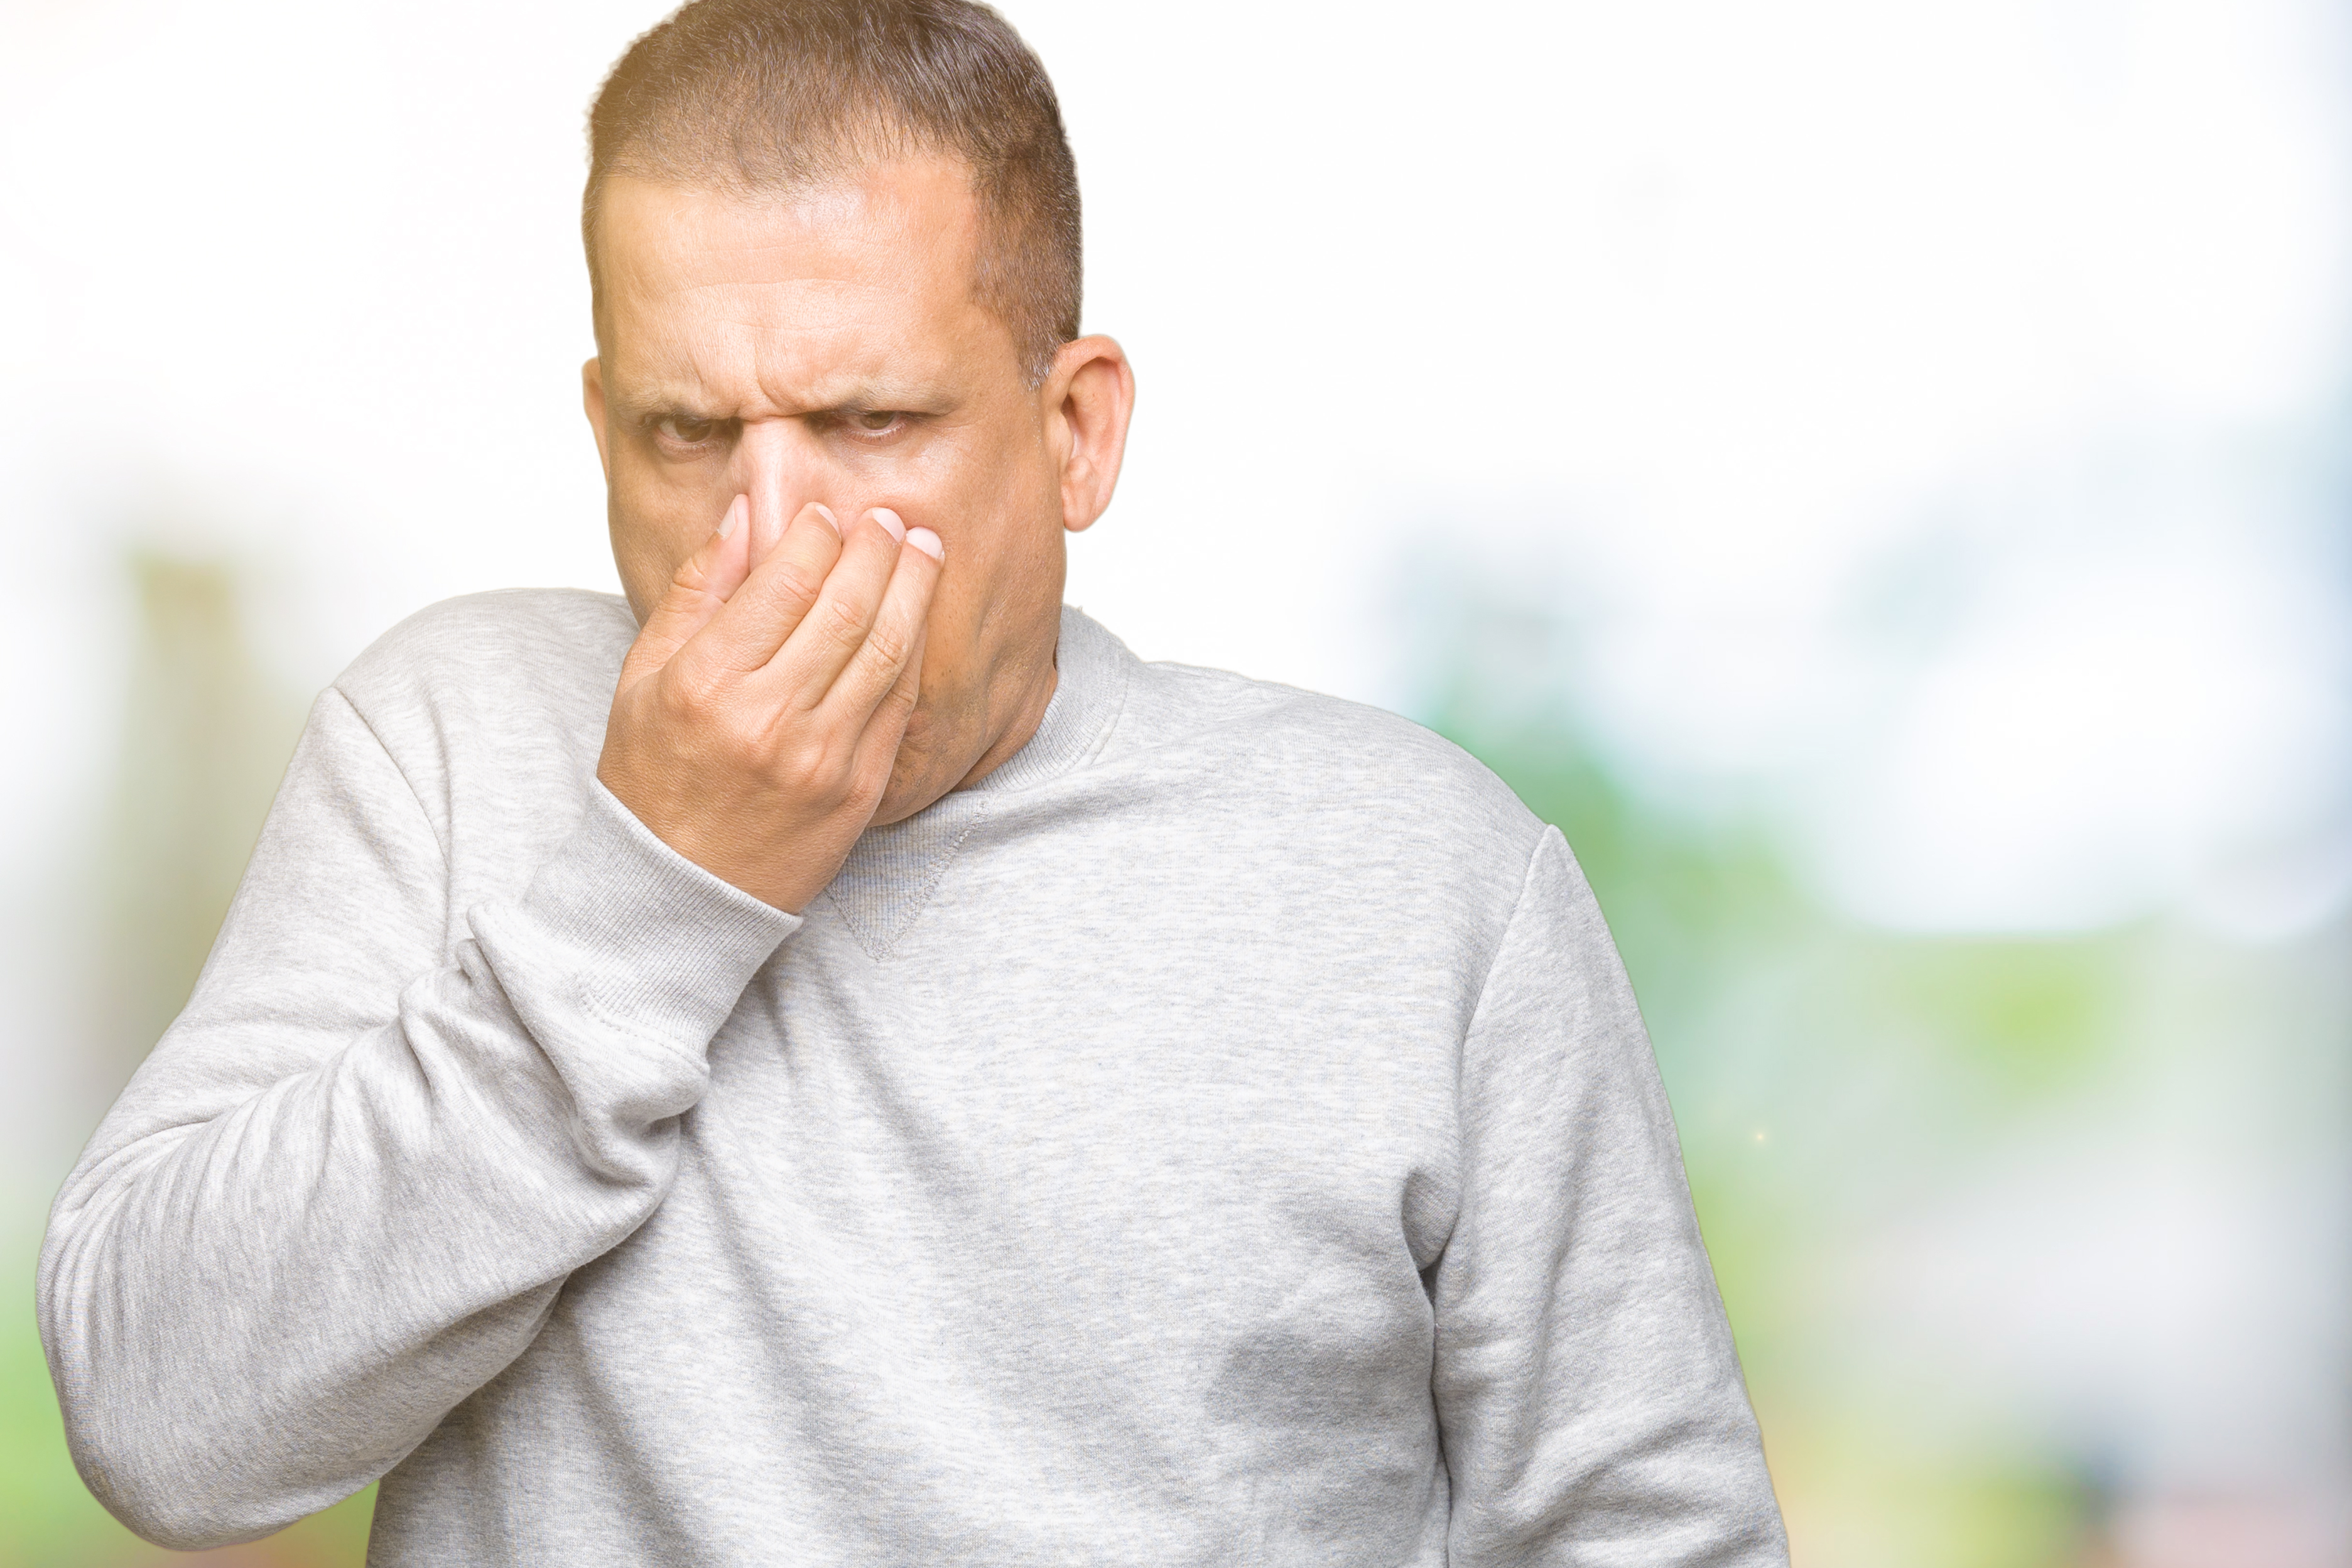 Can Cancer Cause a Foul Smell from Nose?